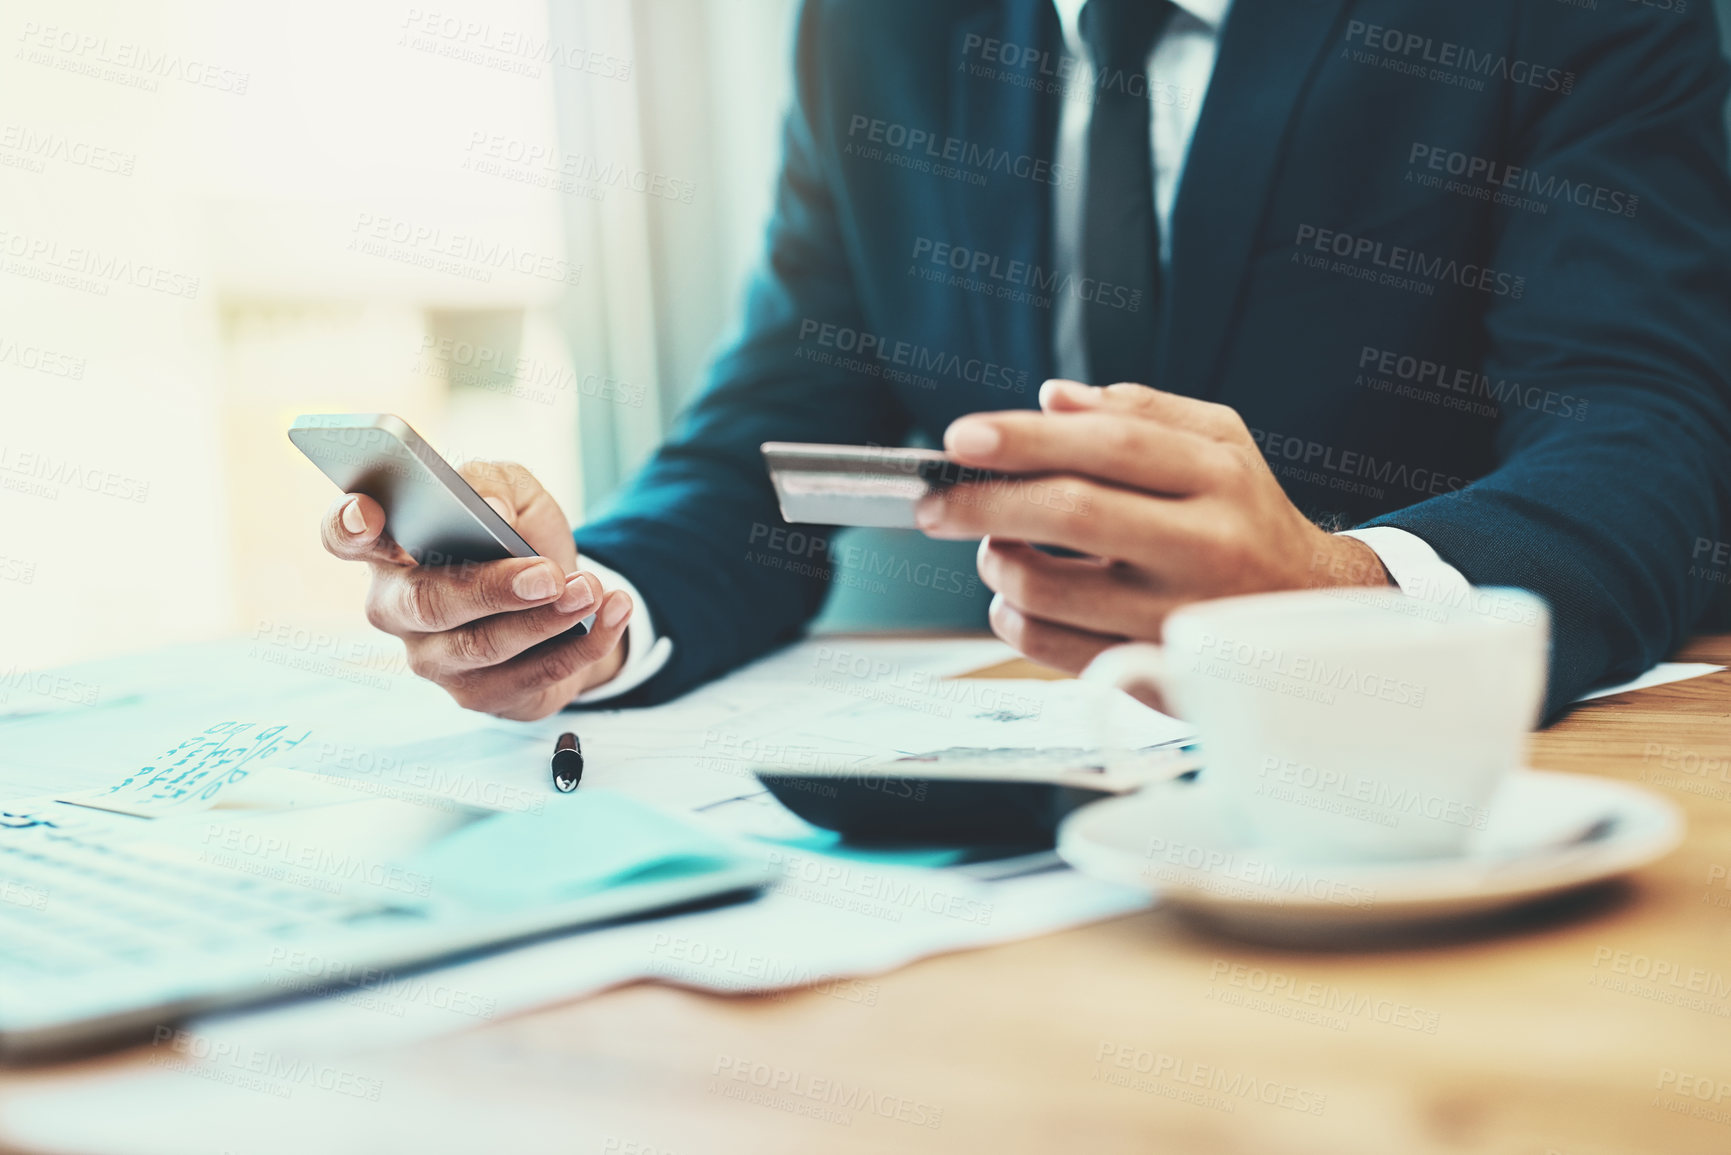 Buy stock photo Shot of an unidentifiable businessman making a credit card payment online